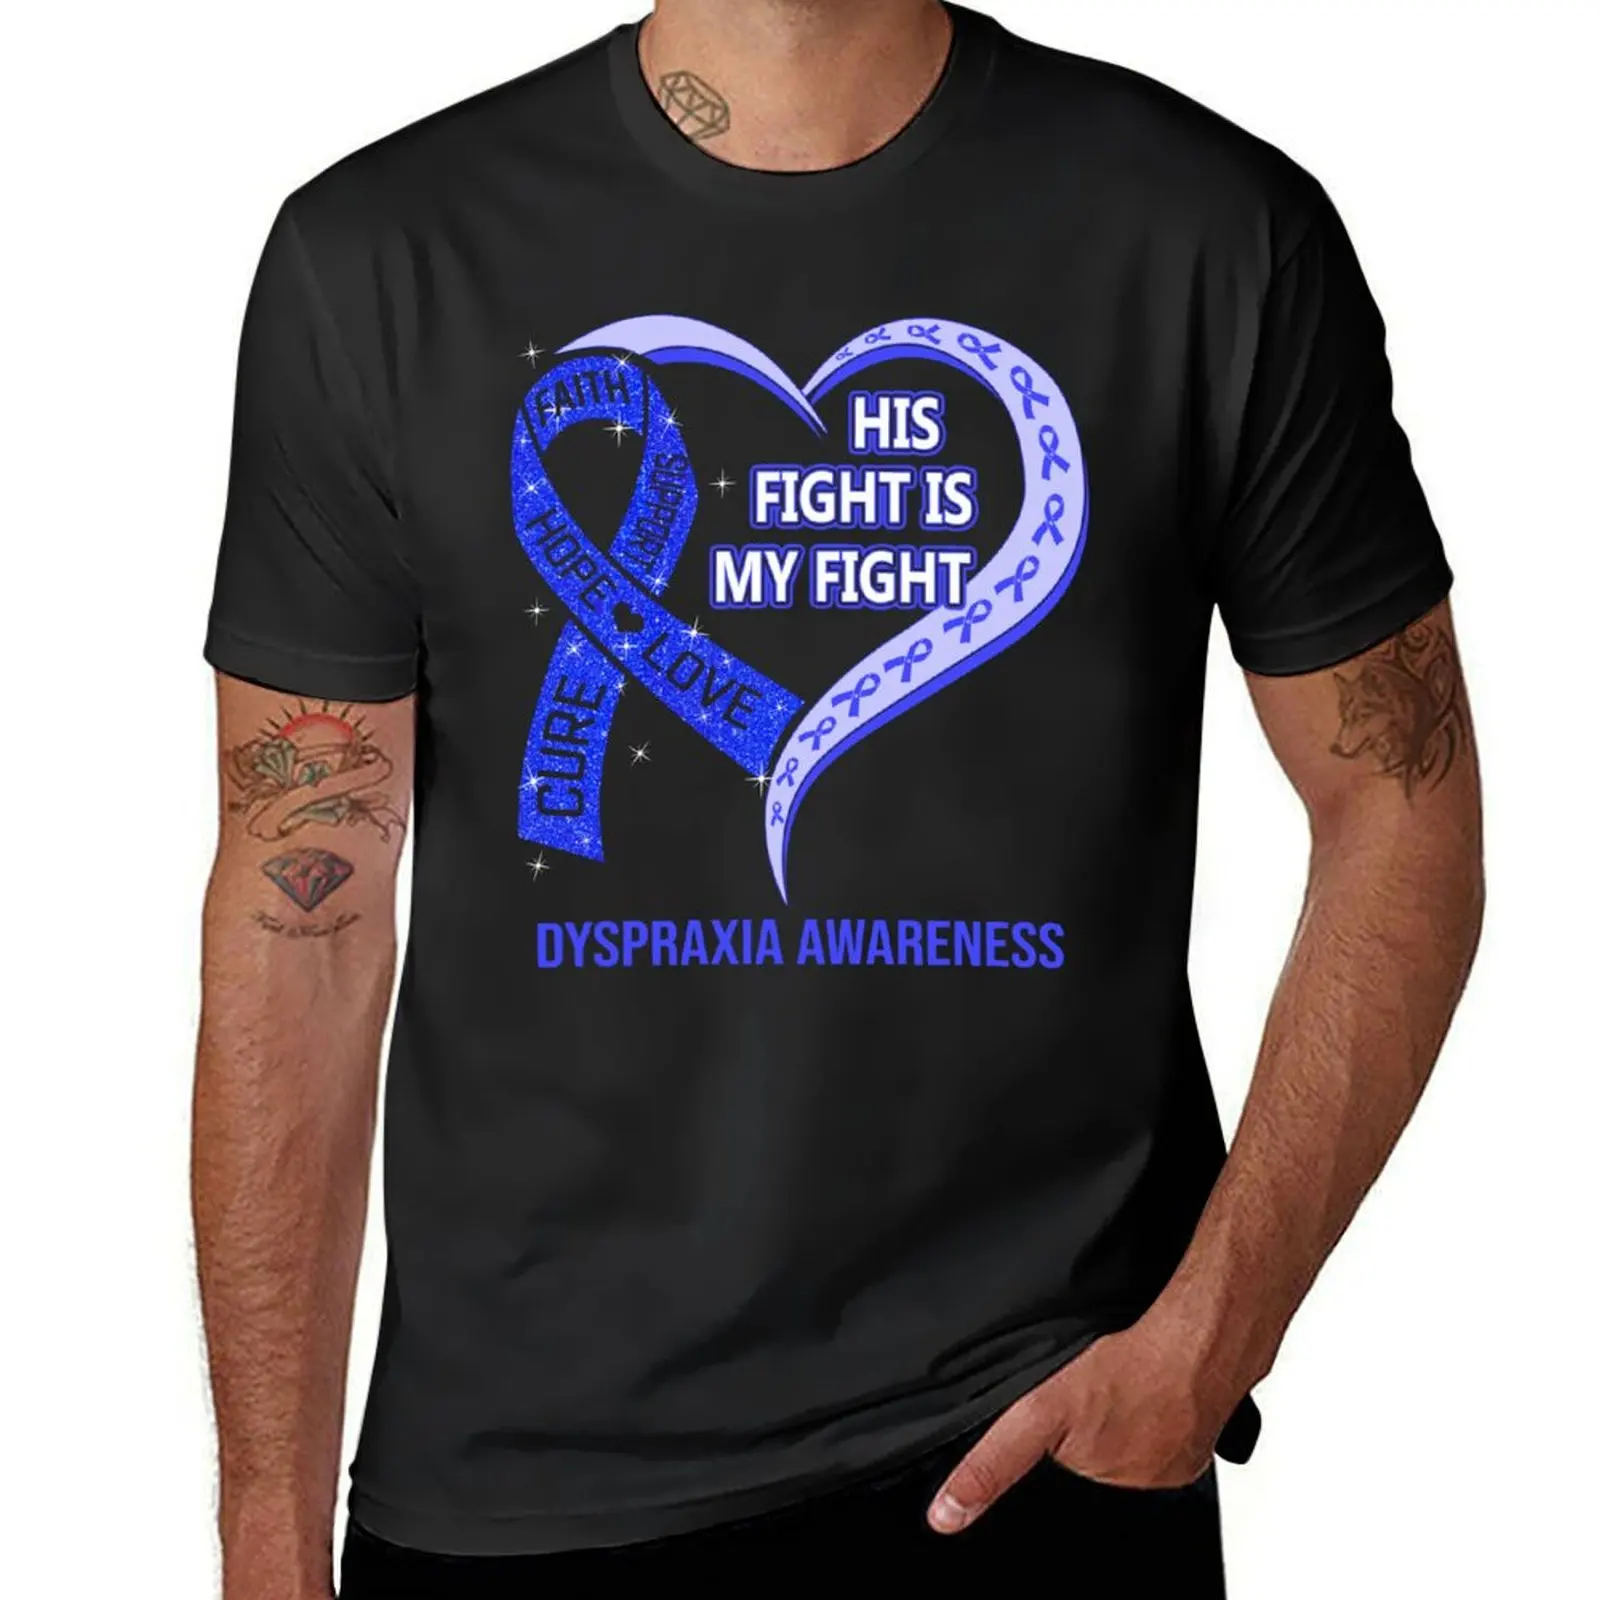 

His Fight Is My Fight Dyspraxia Awareness Ribbon Heart T-Shirt quick drying customs animal prinfor boys Men's t-shirts